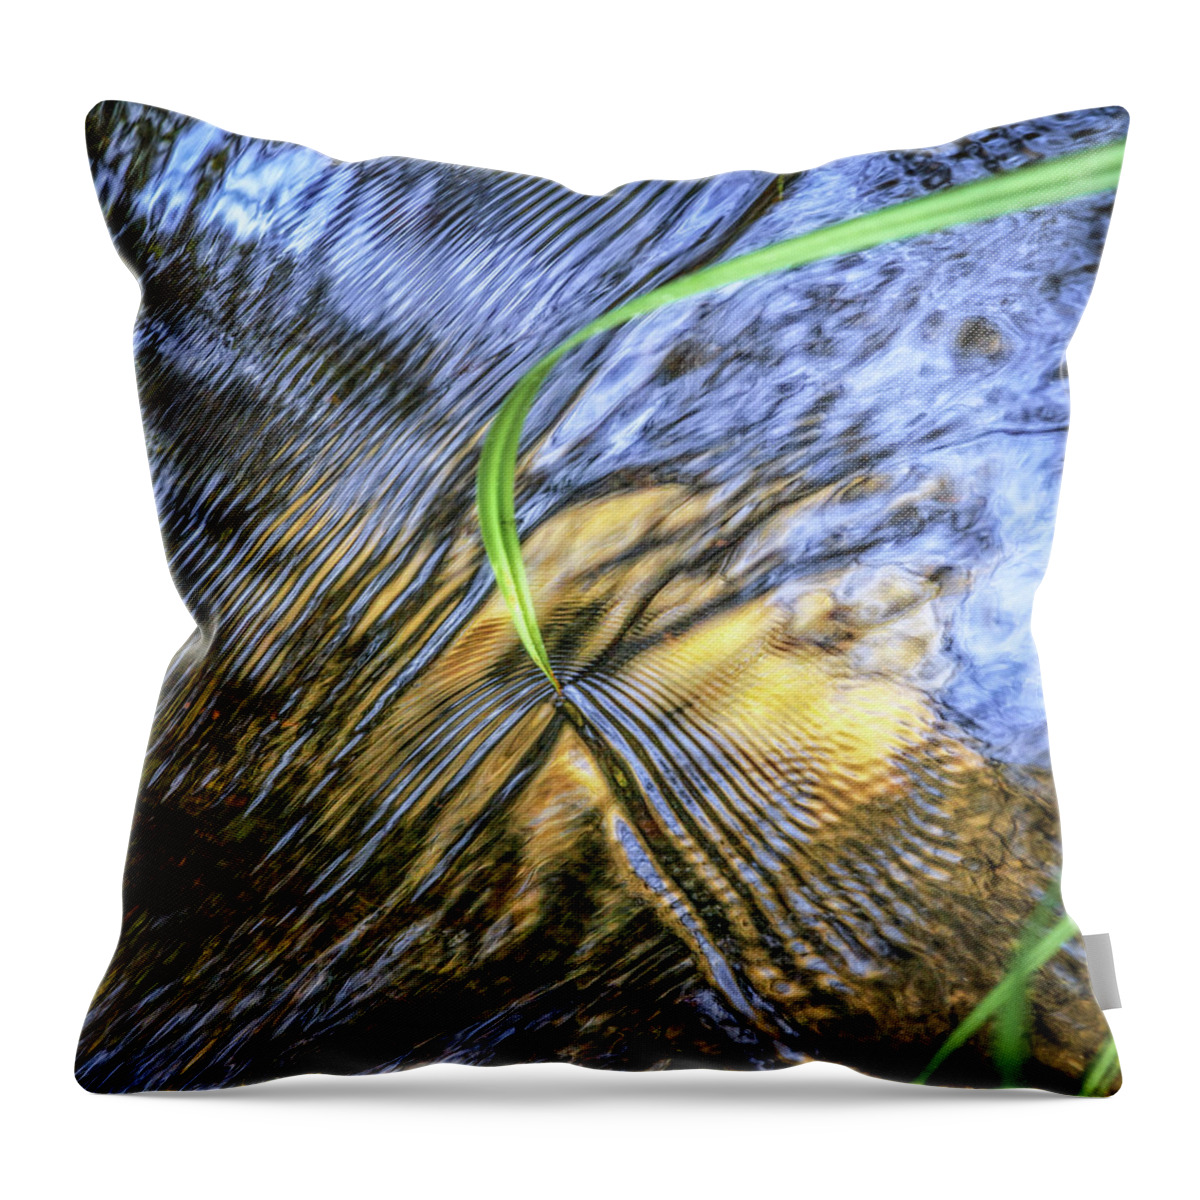 Needle Throw Pillow featuring the photograph Needle on reflective creek by Donald Kinney